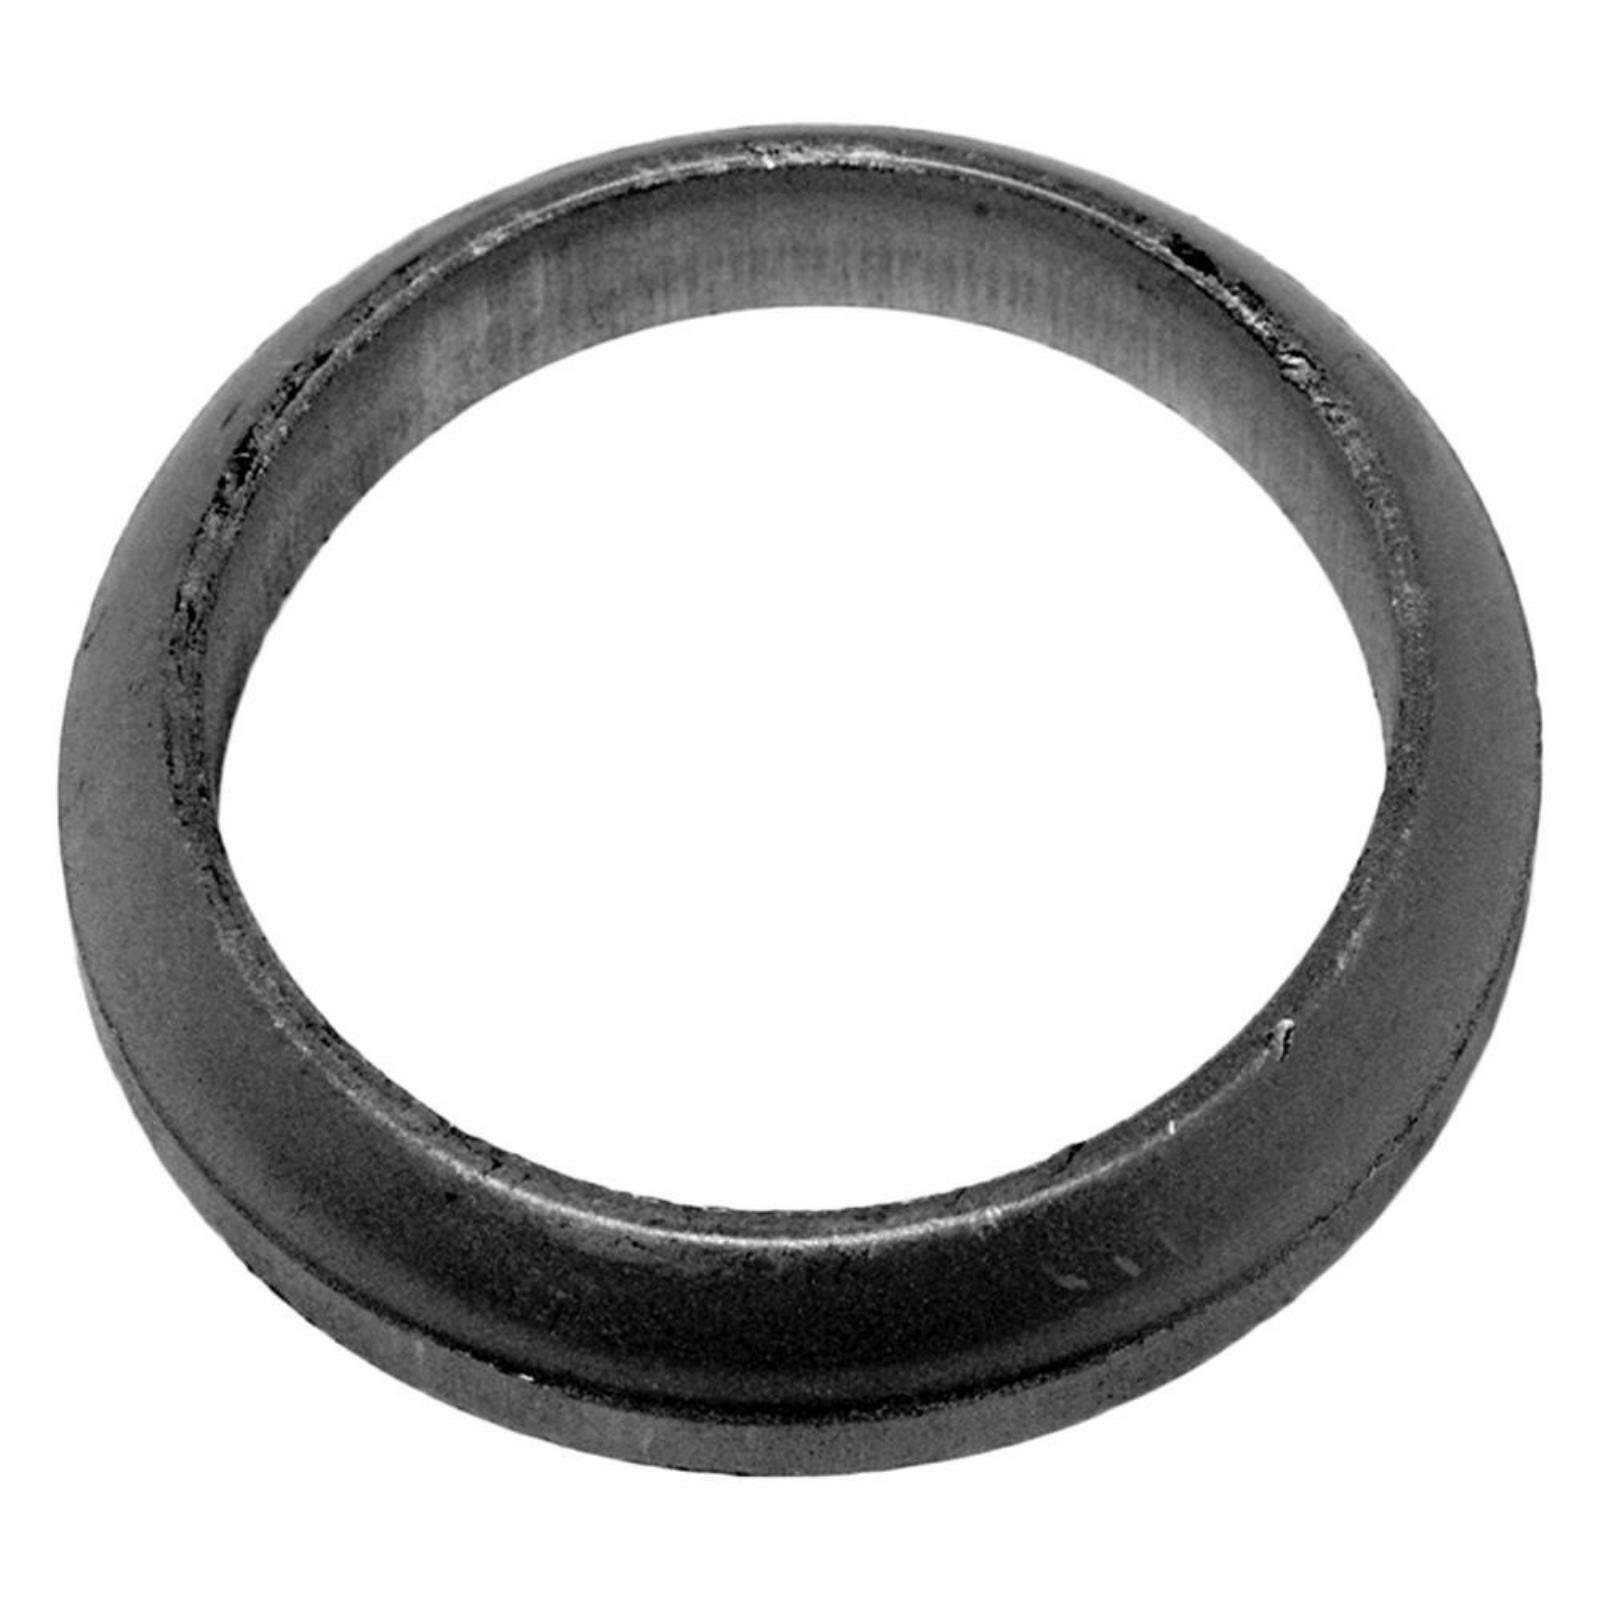 Graphoil Donut Exhaust Pipe Flange Gaske 29A2C6 Fits 1987-1994 Plymouth Sundance